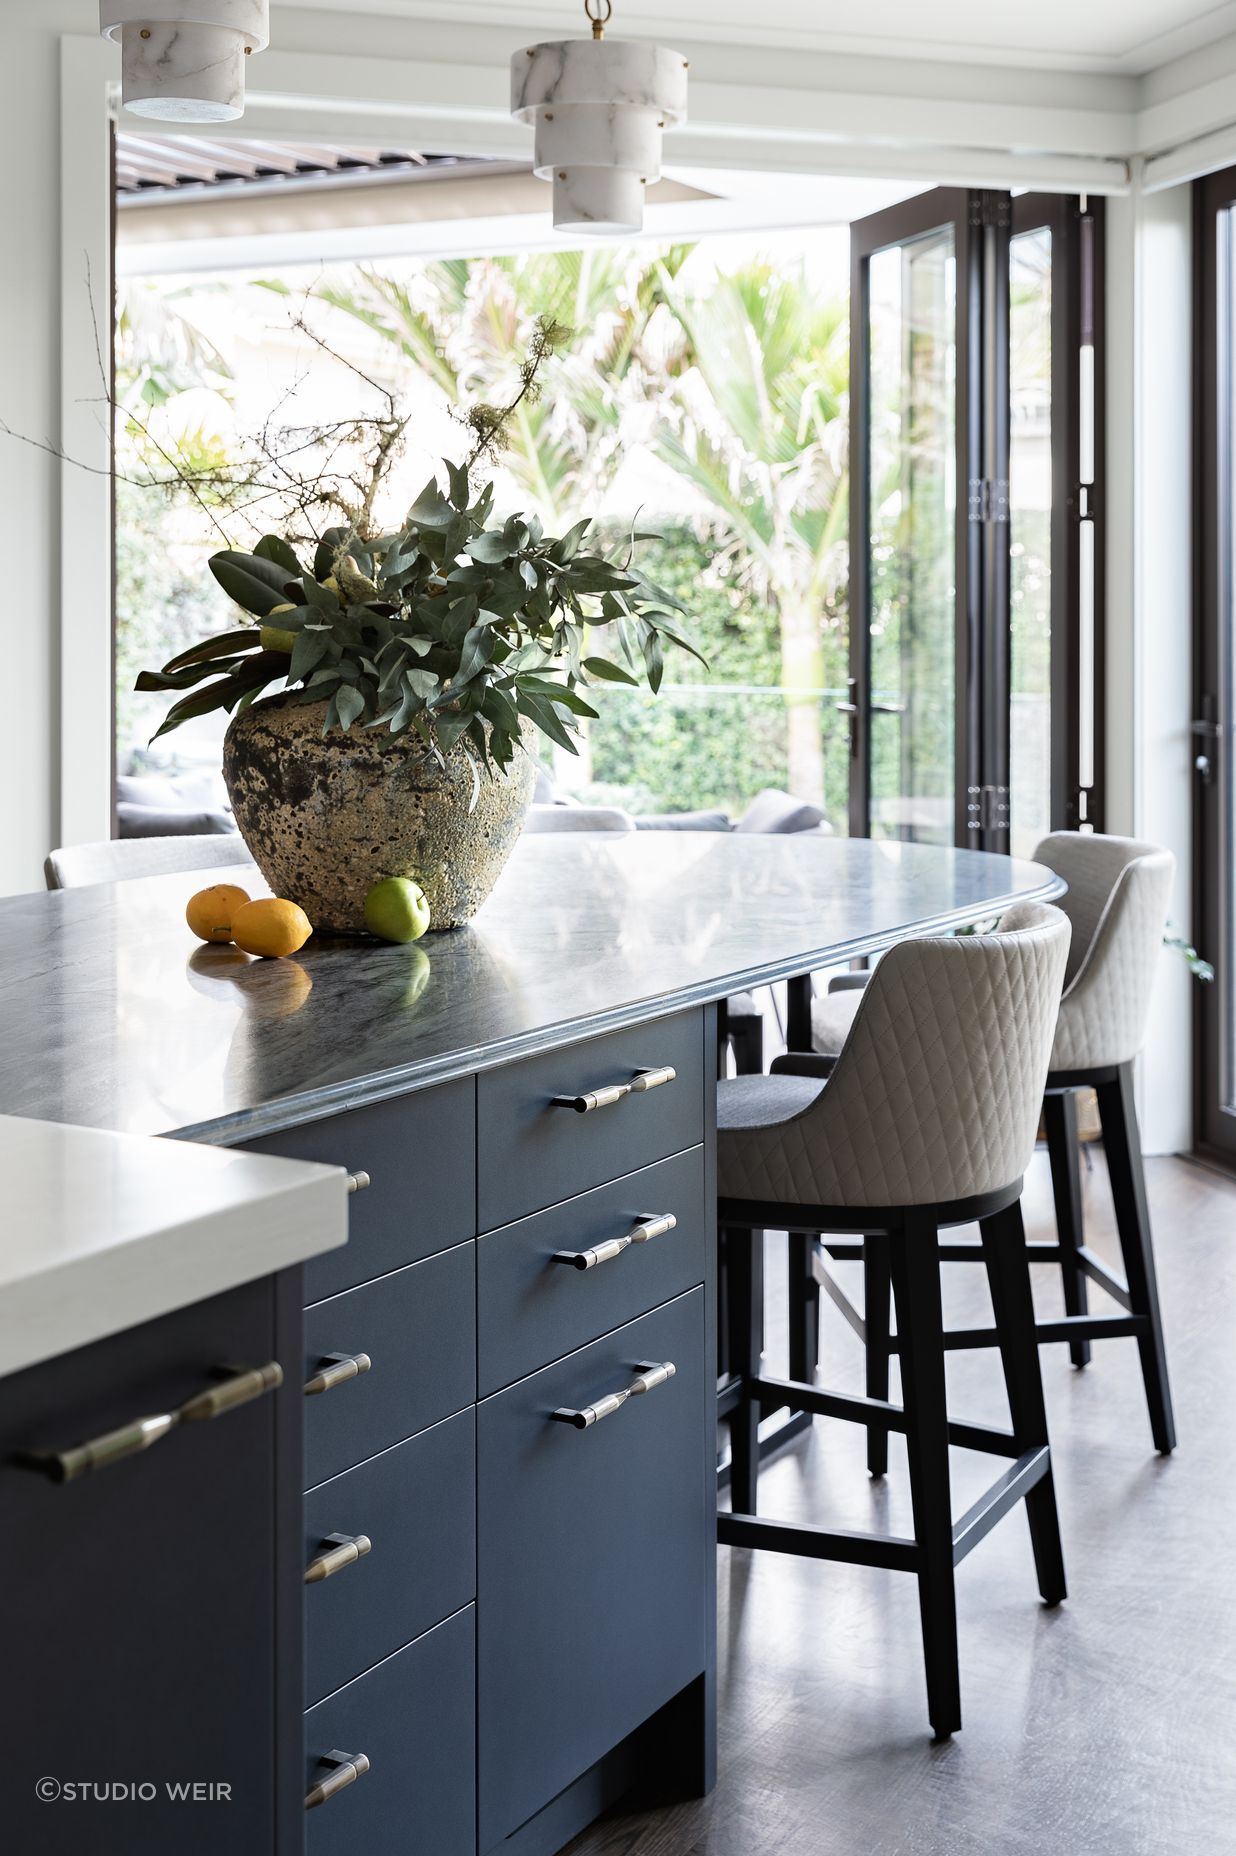 A key feature is the stunning navy-hued quartzite, complemented with a shimmery navy metallic and contrasting light joinery. The richly textural stone table has a unique ogee edge detail achieved with imported tooling and hand-finished.